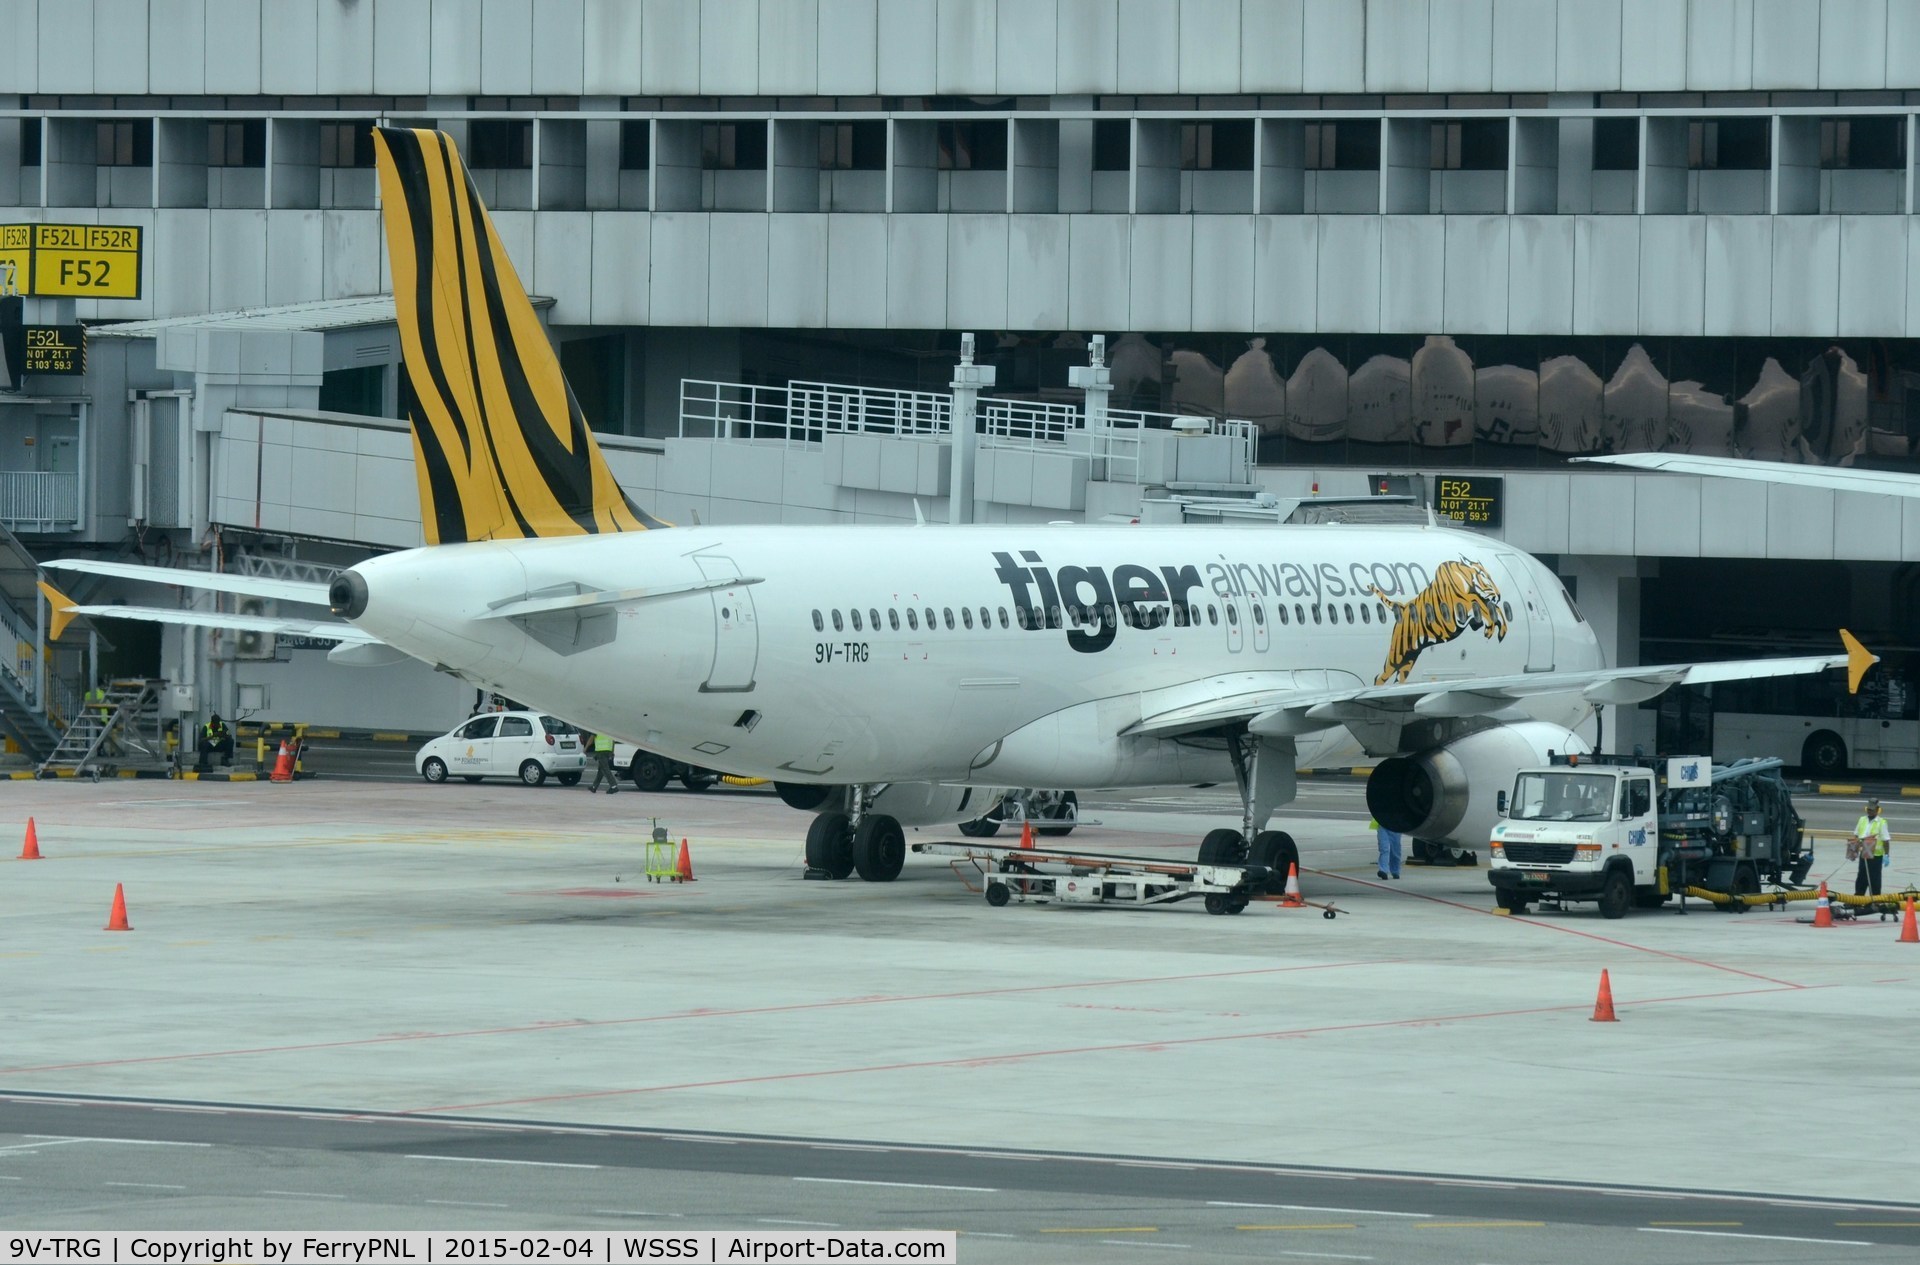 9V-TRG, 2012 Airbus A320-232 C/N 5120, Tiger Airways (old titles and logo) A320.